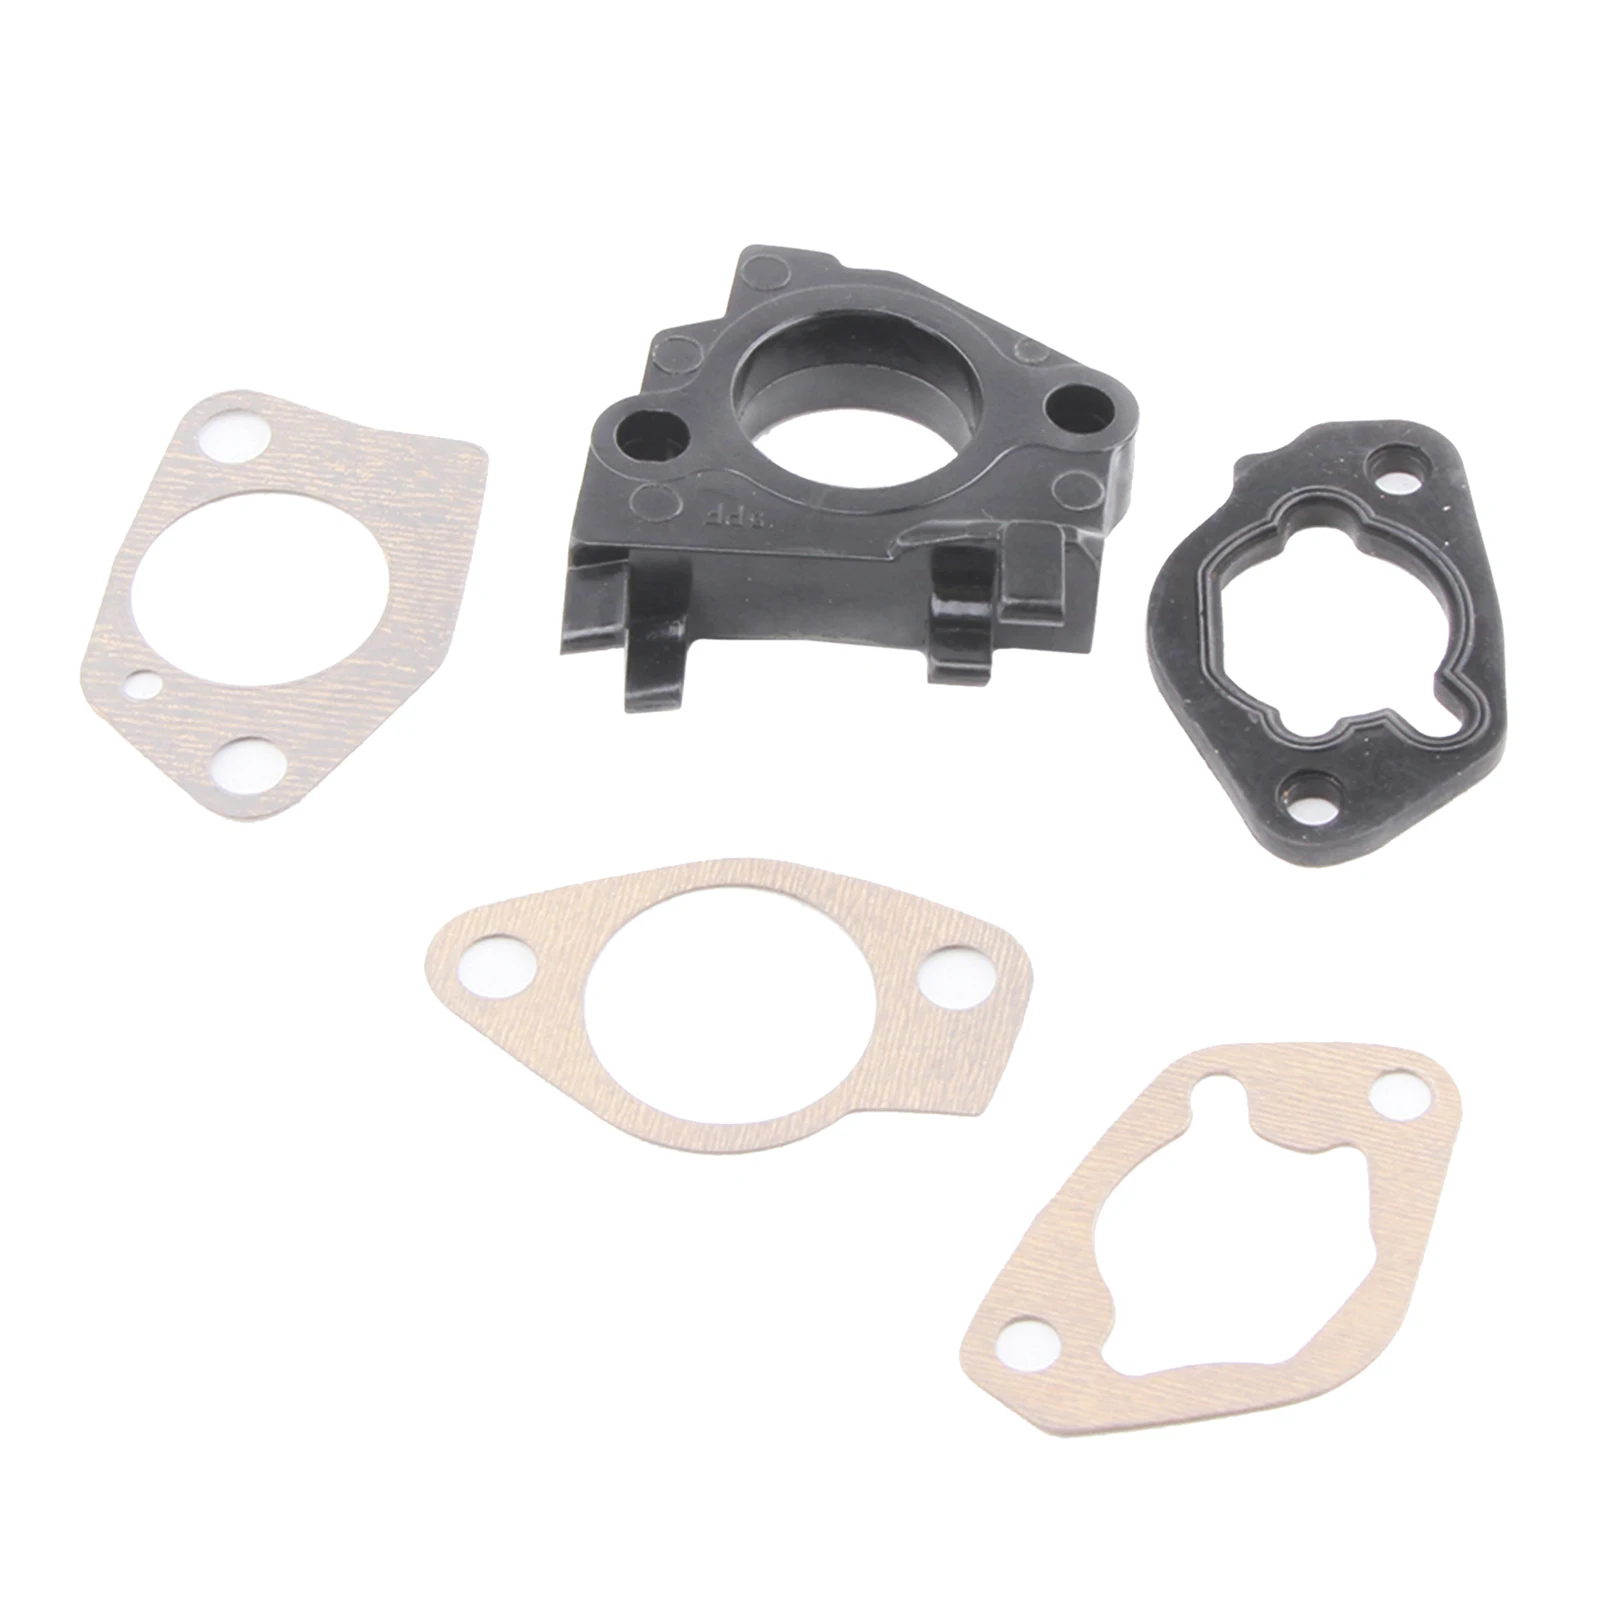 CARBURETOR 5 GASKETS SET for HONDA 13HP GX340 11HP - Made of high quality material, reliable quality and durable